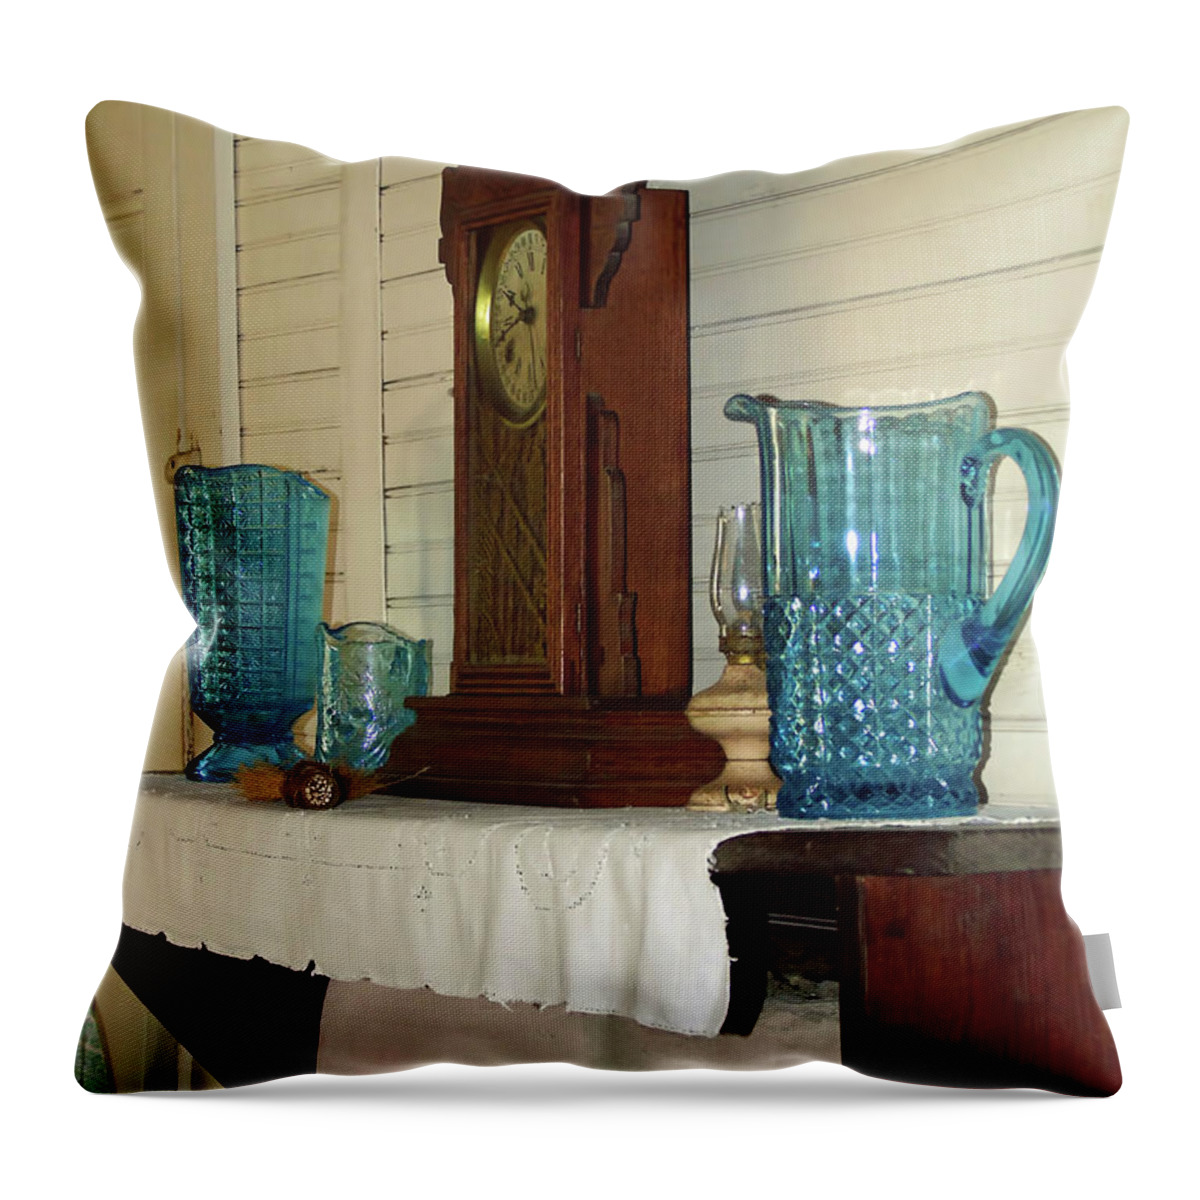 Dudley Farm Throw Pillow featuring the photograph Clock On The Shelf by D Hackett